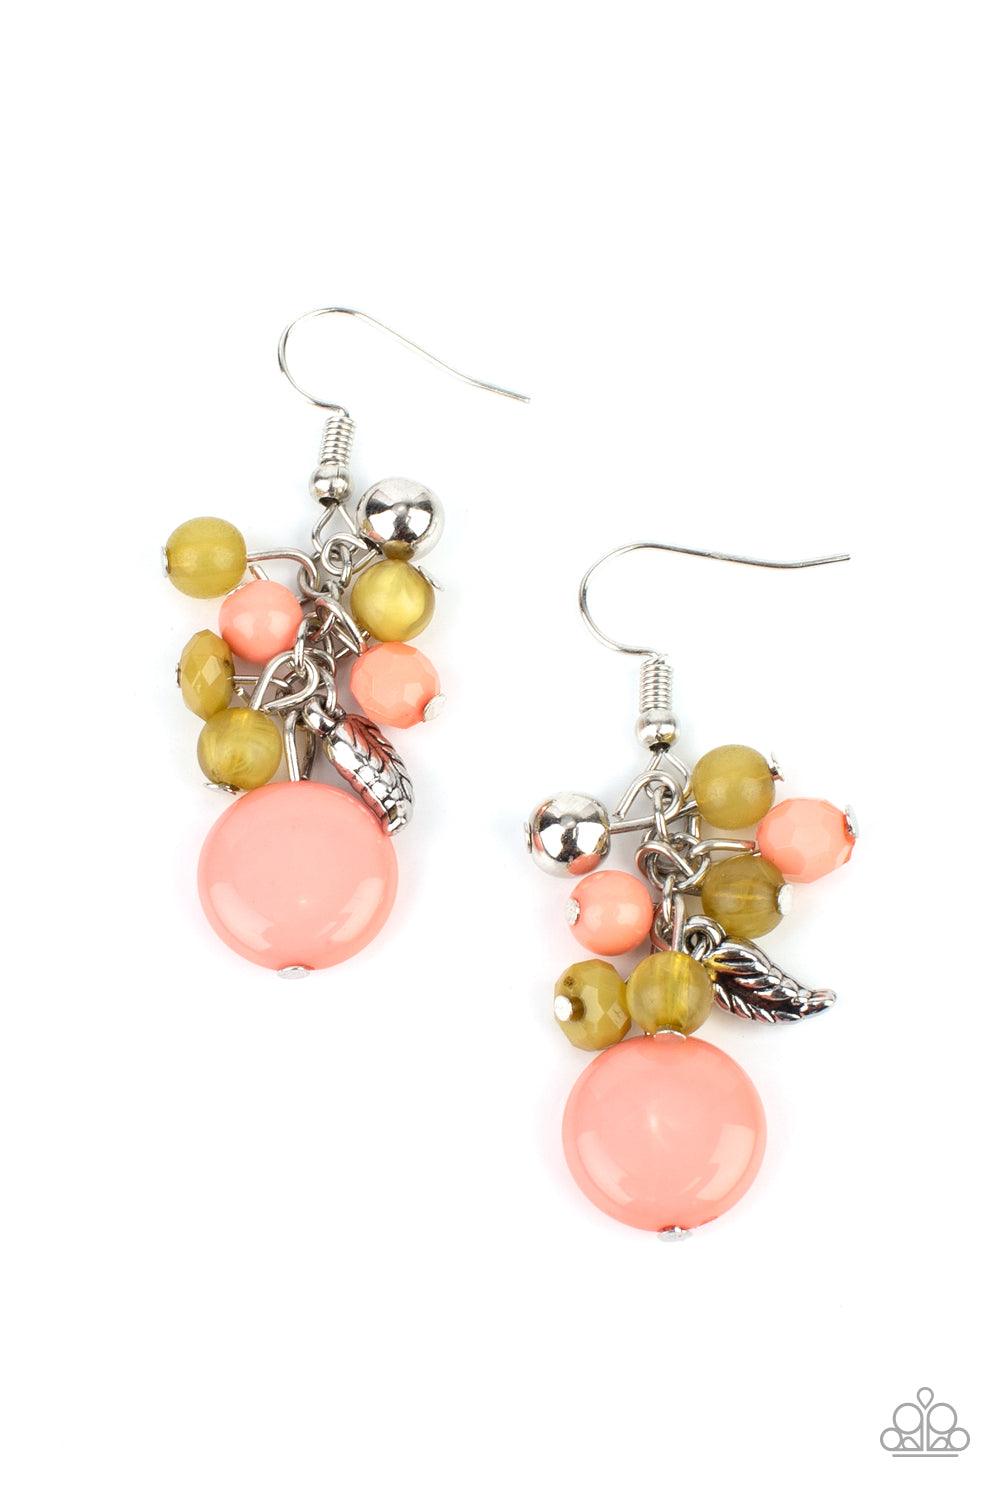 Paparazzi Accessories Whimsically Musical - Multi A cluster of Burnt Coral and Willow beads, accented with a shiny silver bead and a delicate silver feather, tumble together atop a flattened Burnt Coral bead for a whimsical finish. Earring attaches to a s